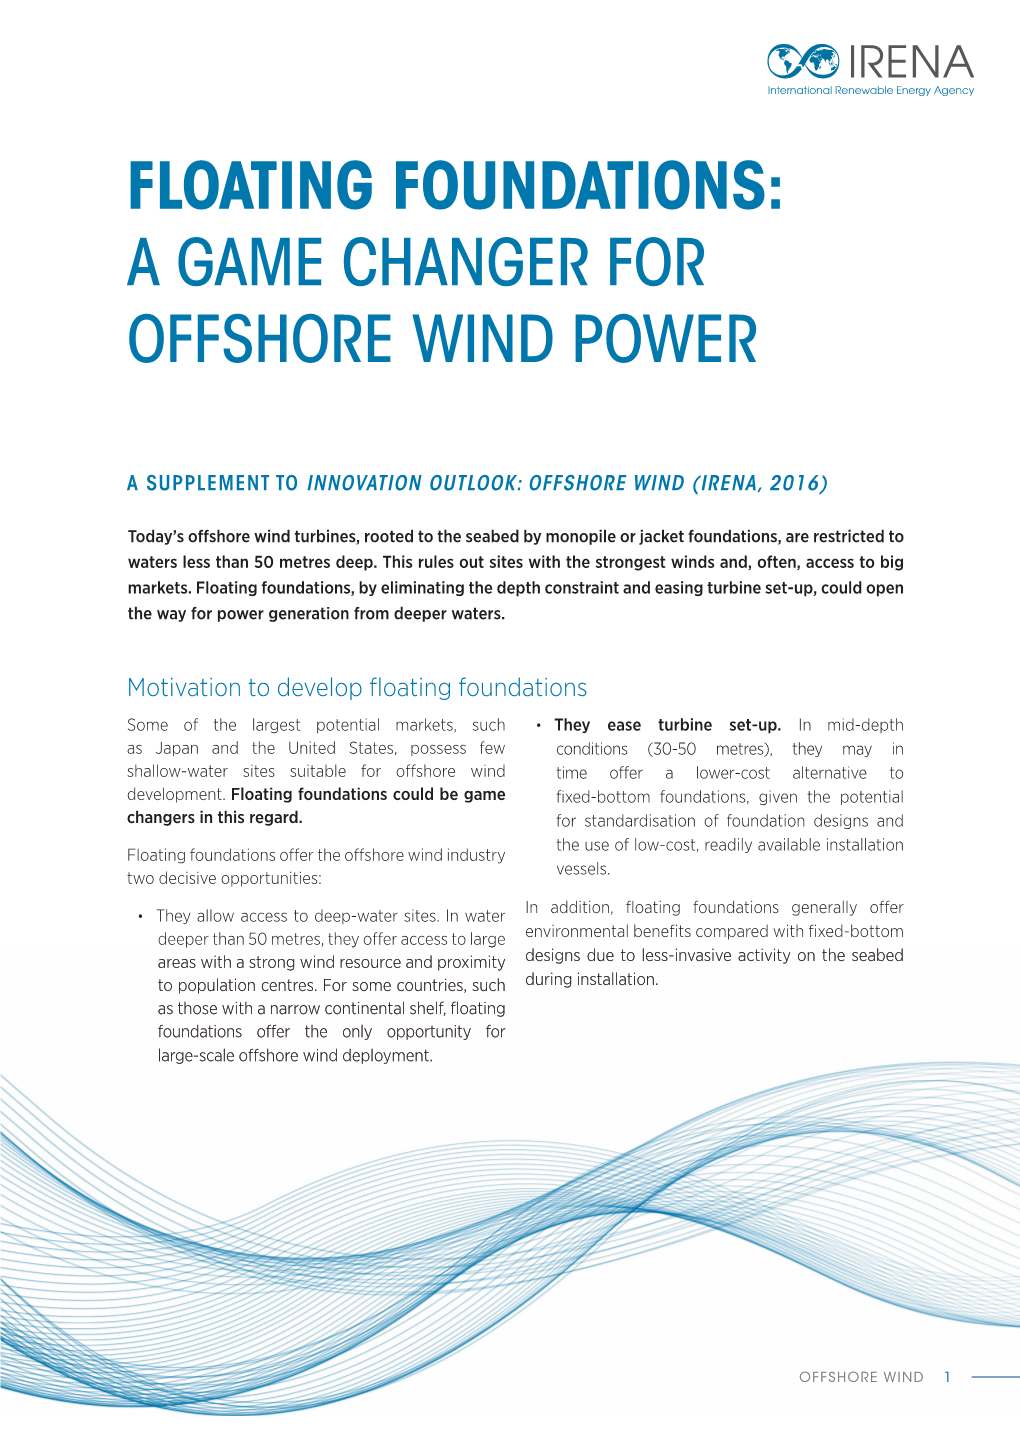 Floating Foundations: a Game Changer for Offshore Wind Power